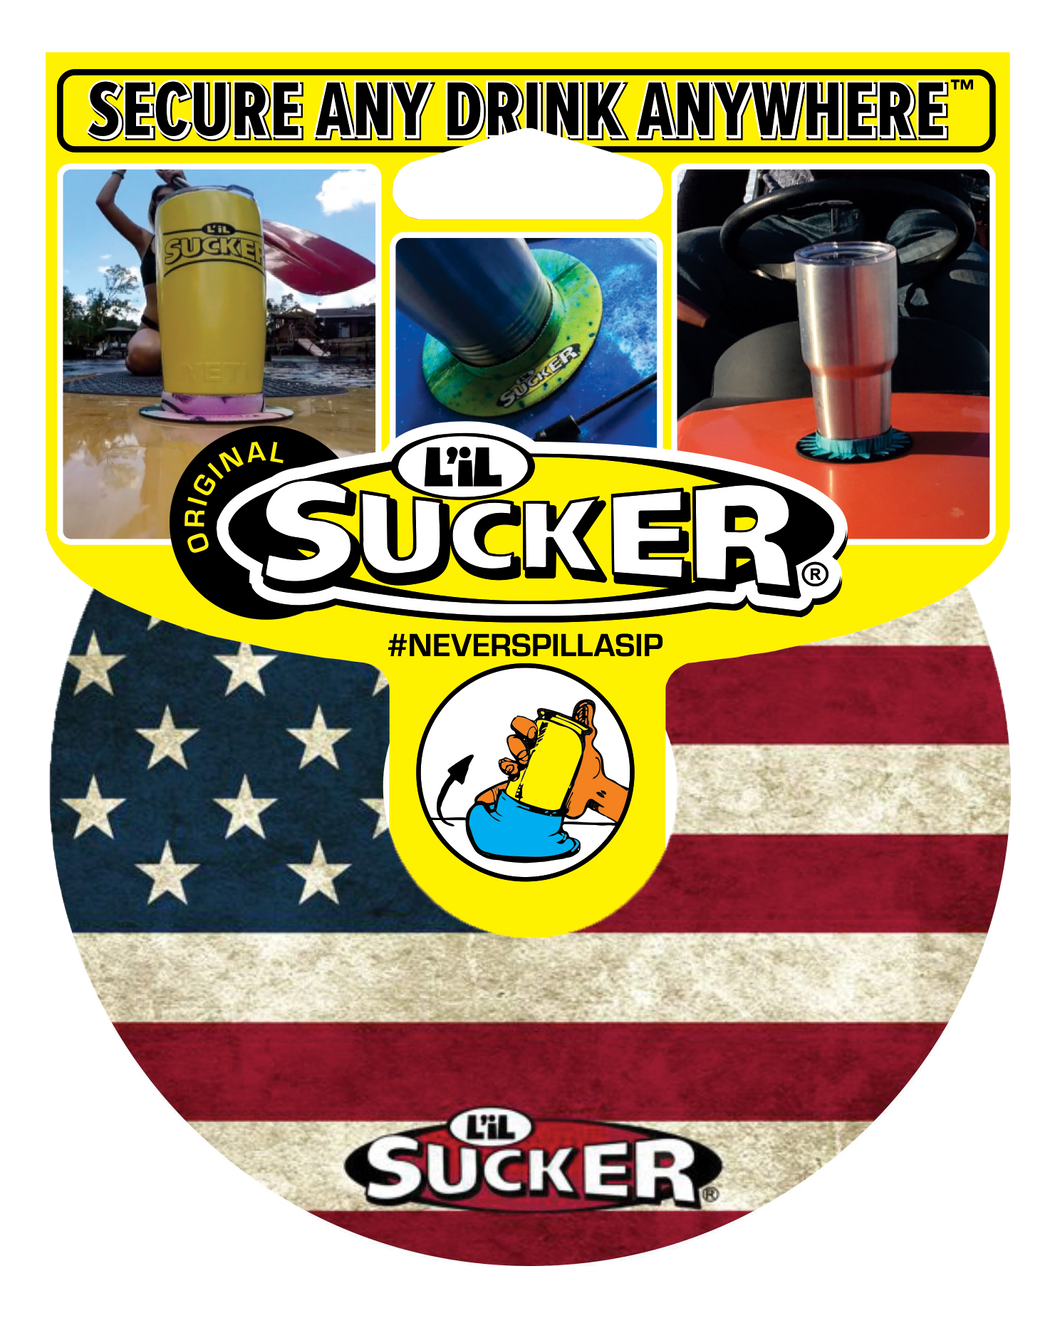 Lil Sucker - STARS & STRIPES STYLE SUCTION DRINK HOLDER GREAT OUTDOORS